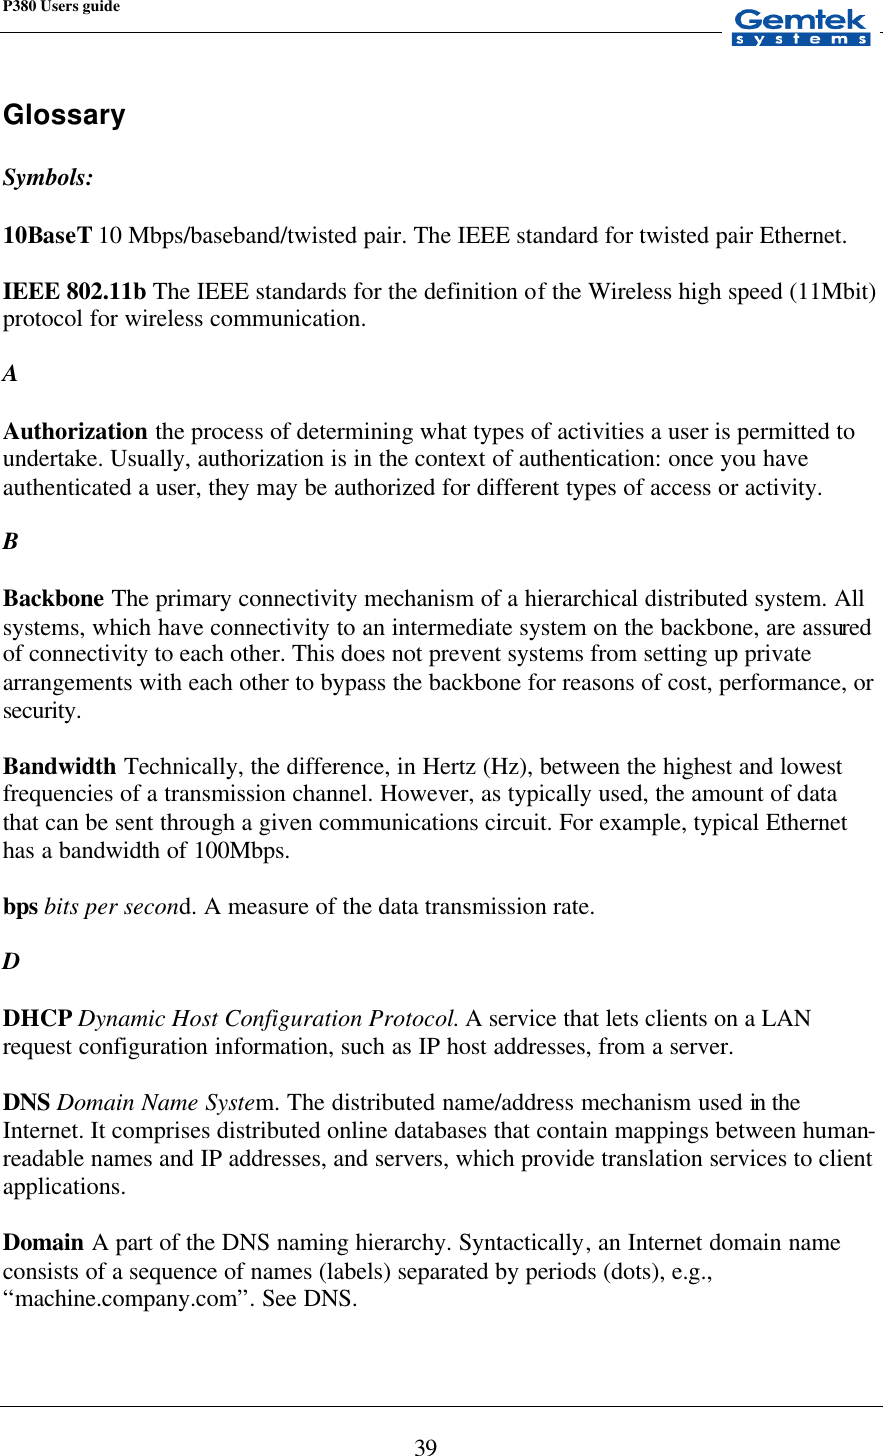 P380 Users guide            39 Glossary  Symbols:   10BaseT 10 Mbps/baseband/twisted pair. The IEEE standard for twisted pair Ethernet.  IEEE 802.11b The IEEE standards for the definition of the Wireless high speed (11Mbit) protocol for wireless communication.  A  Authorization the process of determining what types of activities a user is permitted to undertake. Usually, authorization is in the context of authentication: once you have authenticated a user, they may be authorized for different types of access or activity.  B  Backbone The primary connectivity mechanism of a hierarchical distributed system. All systems, which have connectivity to an intermediate system on the backbone, are assured of connectivity to each other. This does not prevent systems from setting up private arrangements with each other to bypass the backbone for reasons of cost, performance, or security.  Bandwidth Technically, the difference, in Hertz (Hz), between the highest and lowest frequencies of a transmission channel. However, as typically used, the amount of data that can be sent through a given communications circuit. For example, typical Ethernet has a bandwidth of 100Mbps.  bps bits per second. A measure of the data transmission rate.  D  DHCP Dynamic Host Configuration Protocol. A service that lets clients on a LAN request configuration information, such as IP host addresses, from a server.  DNS Domain Name System. The distributed name/address mechanism used in the Internet. It comprises distributed online databases that contain mappings between human-readable names and IP addresses, and servers, which provide translation services to client applications.  Domain  A part of the DNS naming hierarchy. Syntactically, an Internet domain name consists of a sequence of names (labels) separated by periods (dots), e.g., “machine.company.com”. See DNS.  